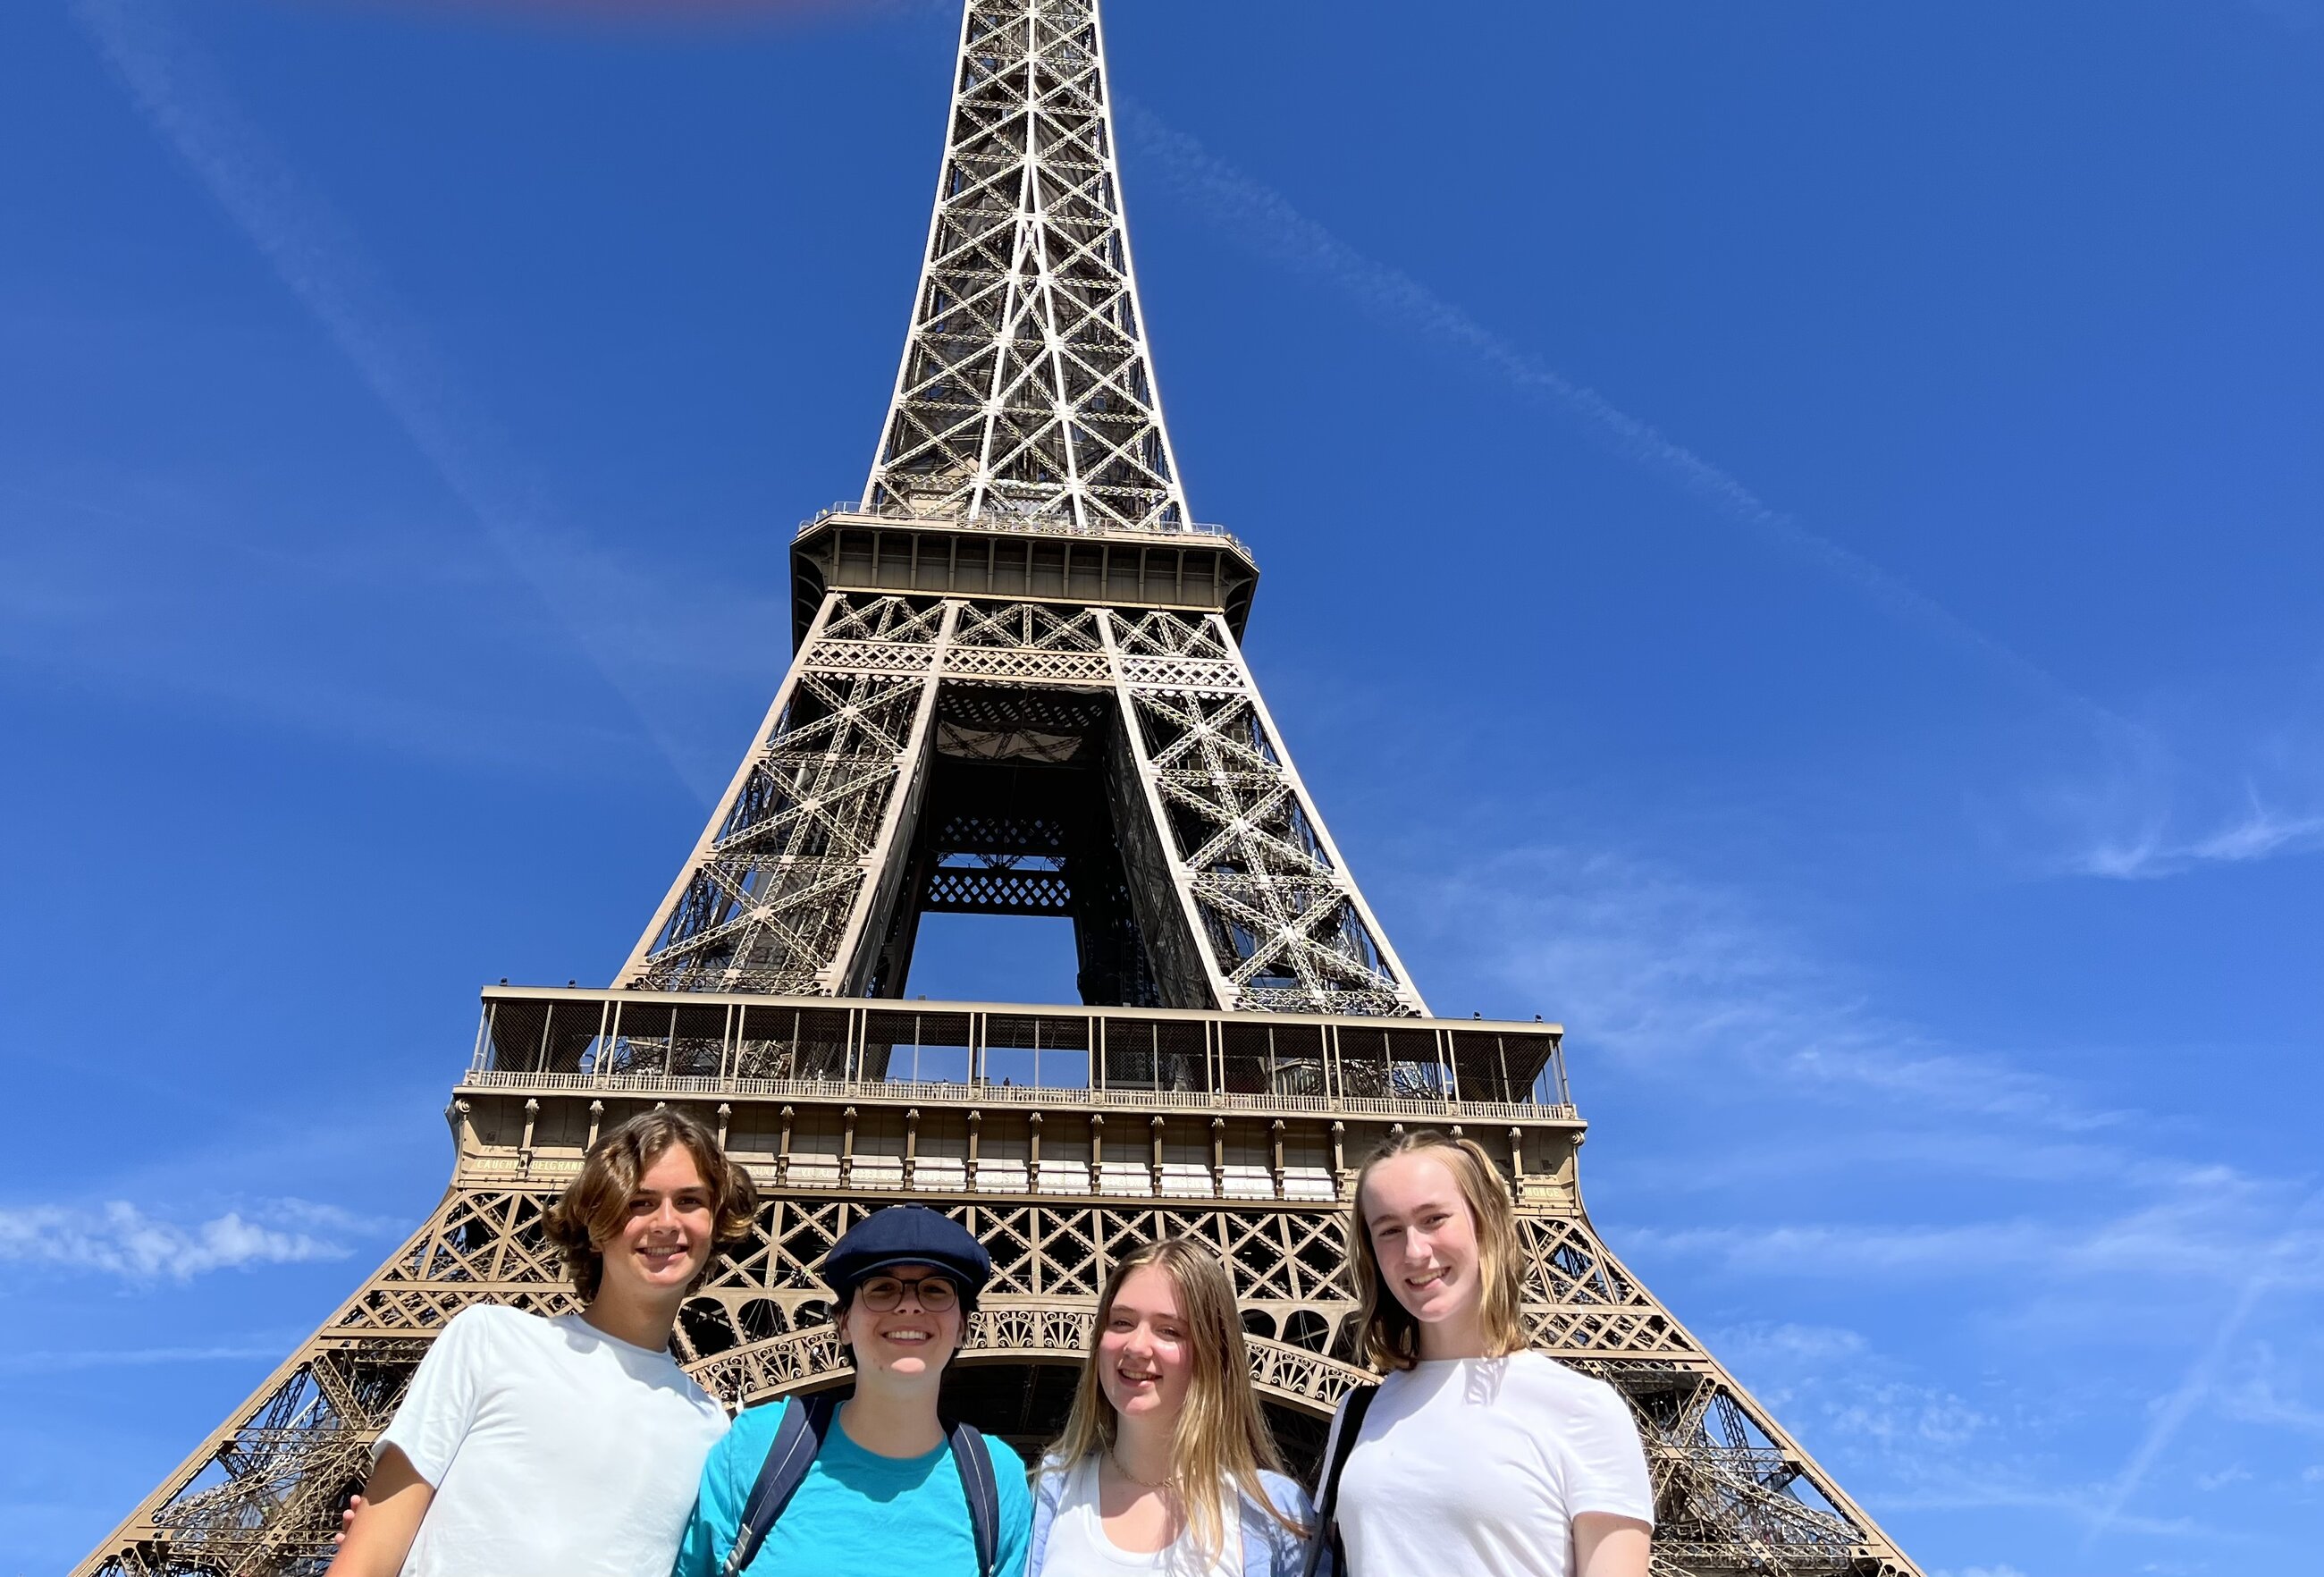 My trip friends and I at the Eiffel Tower :)